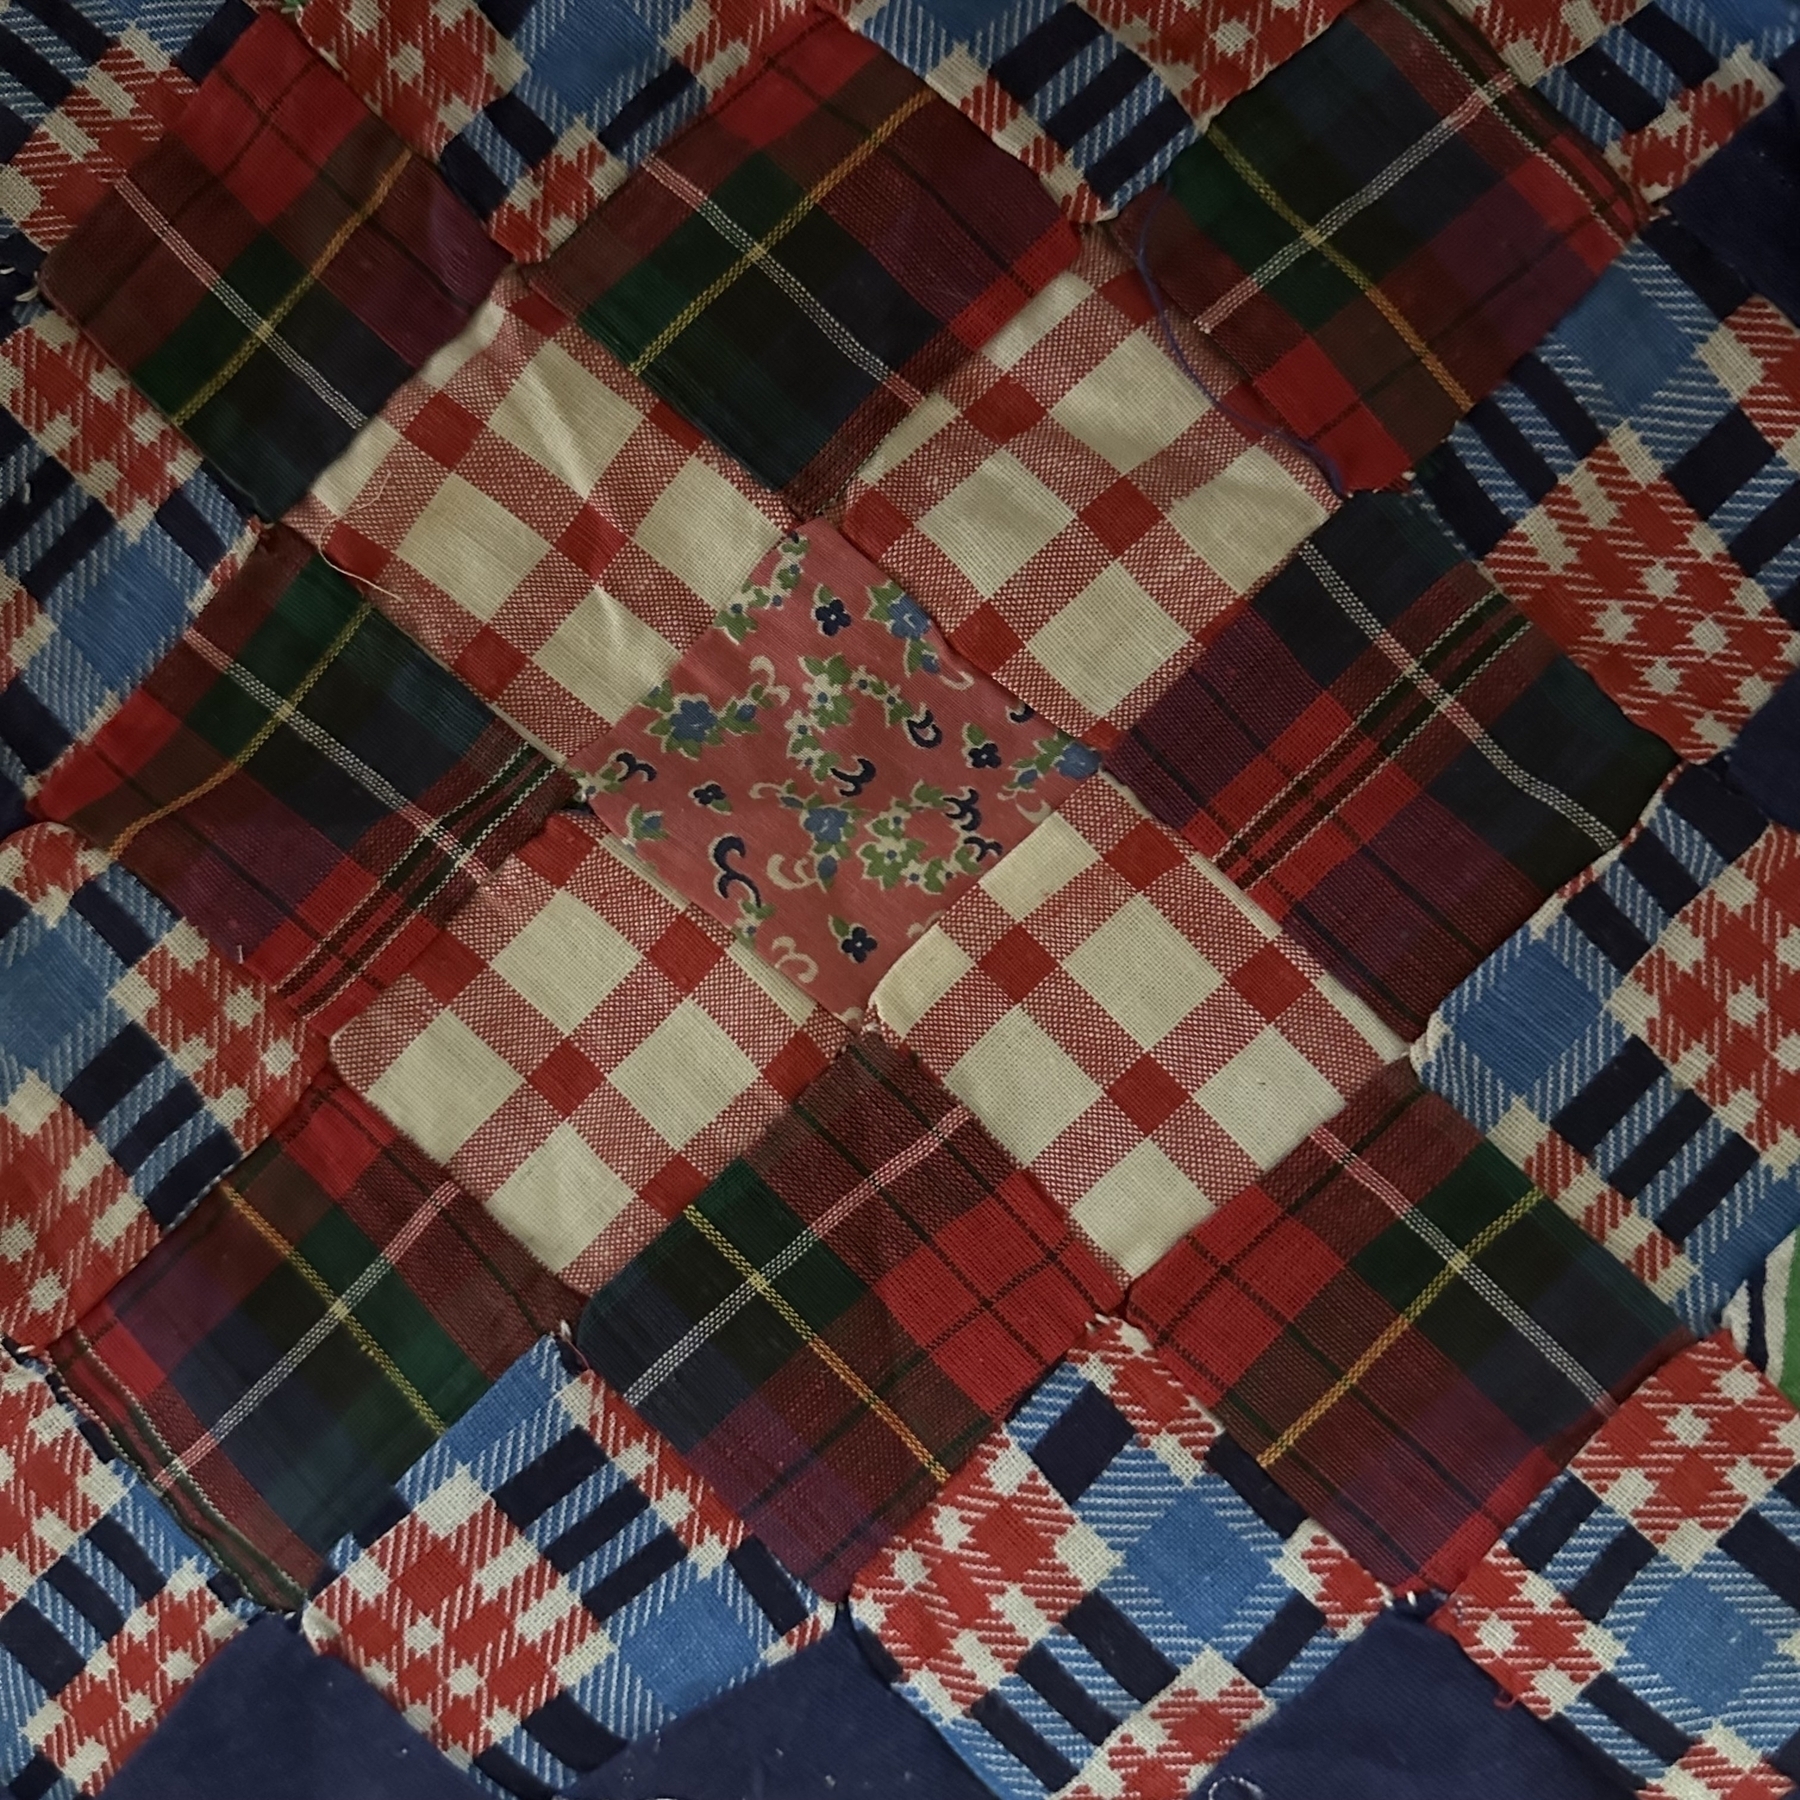 Mom’s hand sewn patchwork quilt piece.